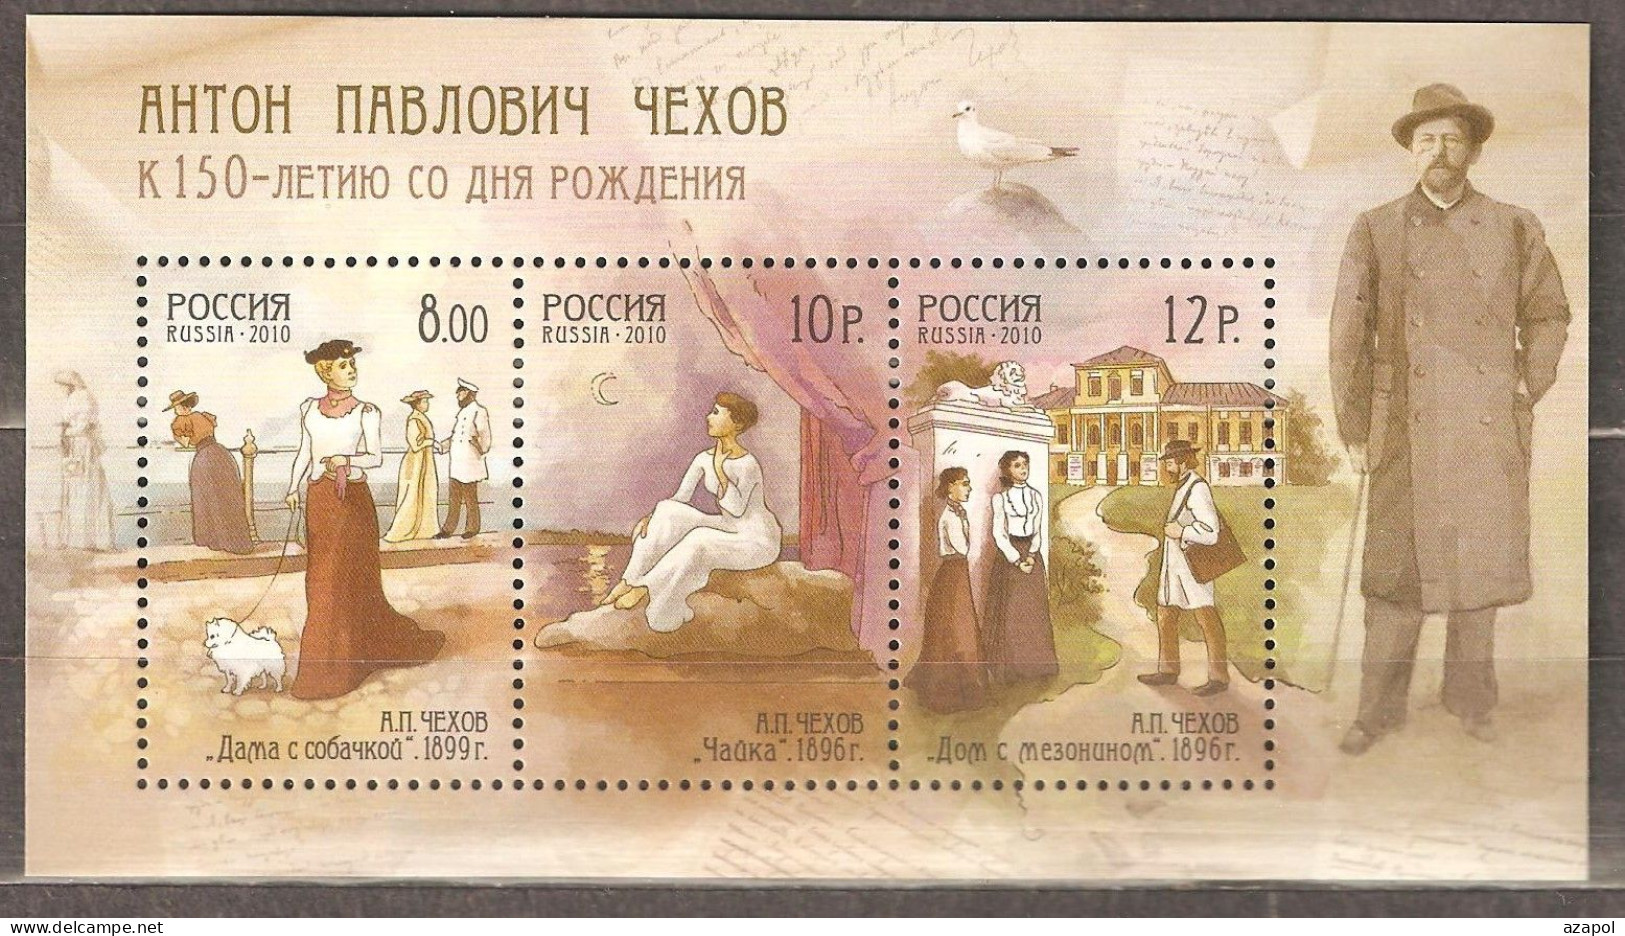 Russia: Mint Block, 150 Years Of The Birth Of Anton Chekhov - Famous Writer, 2010, Mi#Bl-129, MNH - Ecrivains